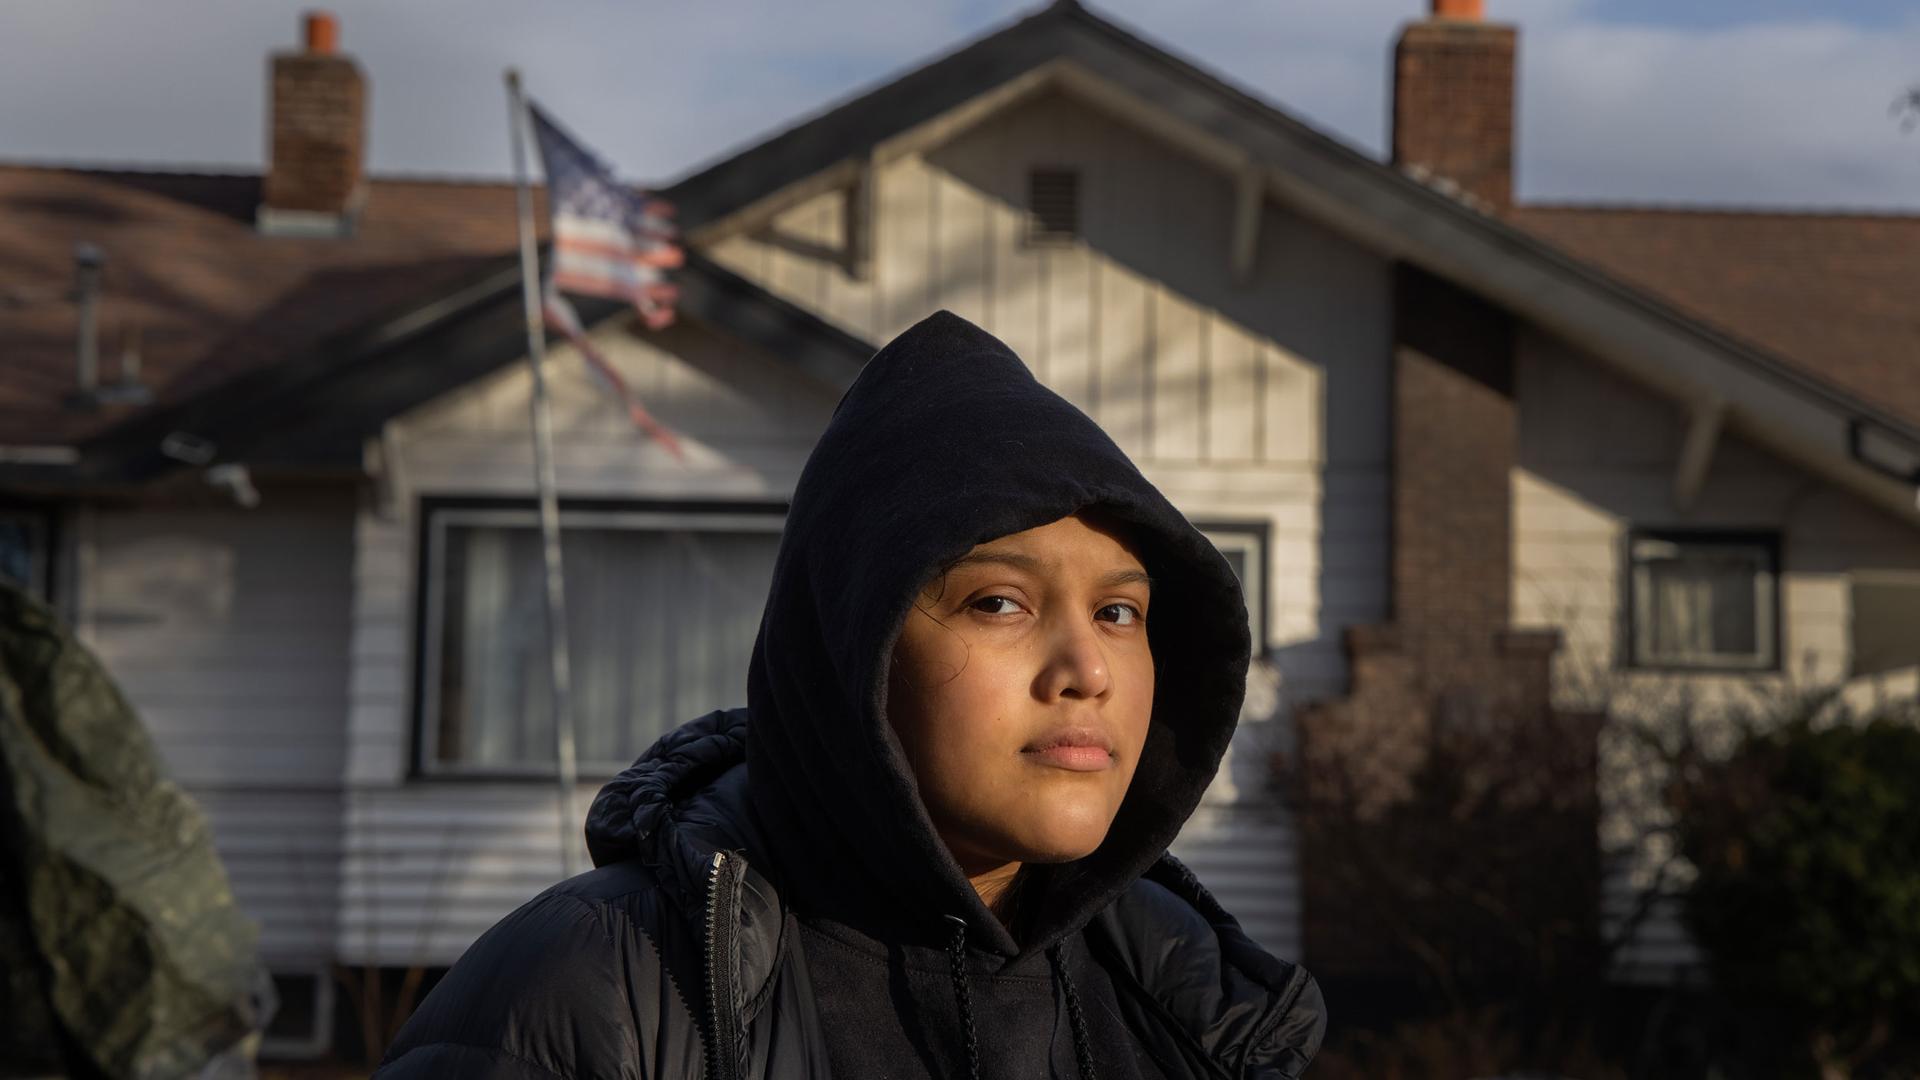 A woman is shown wearing a dark hooded sweatshirt and jacket with a home in the distance flying a tattered US flag.